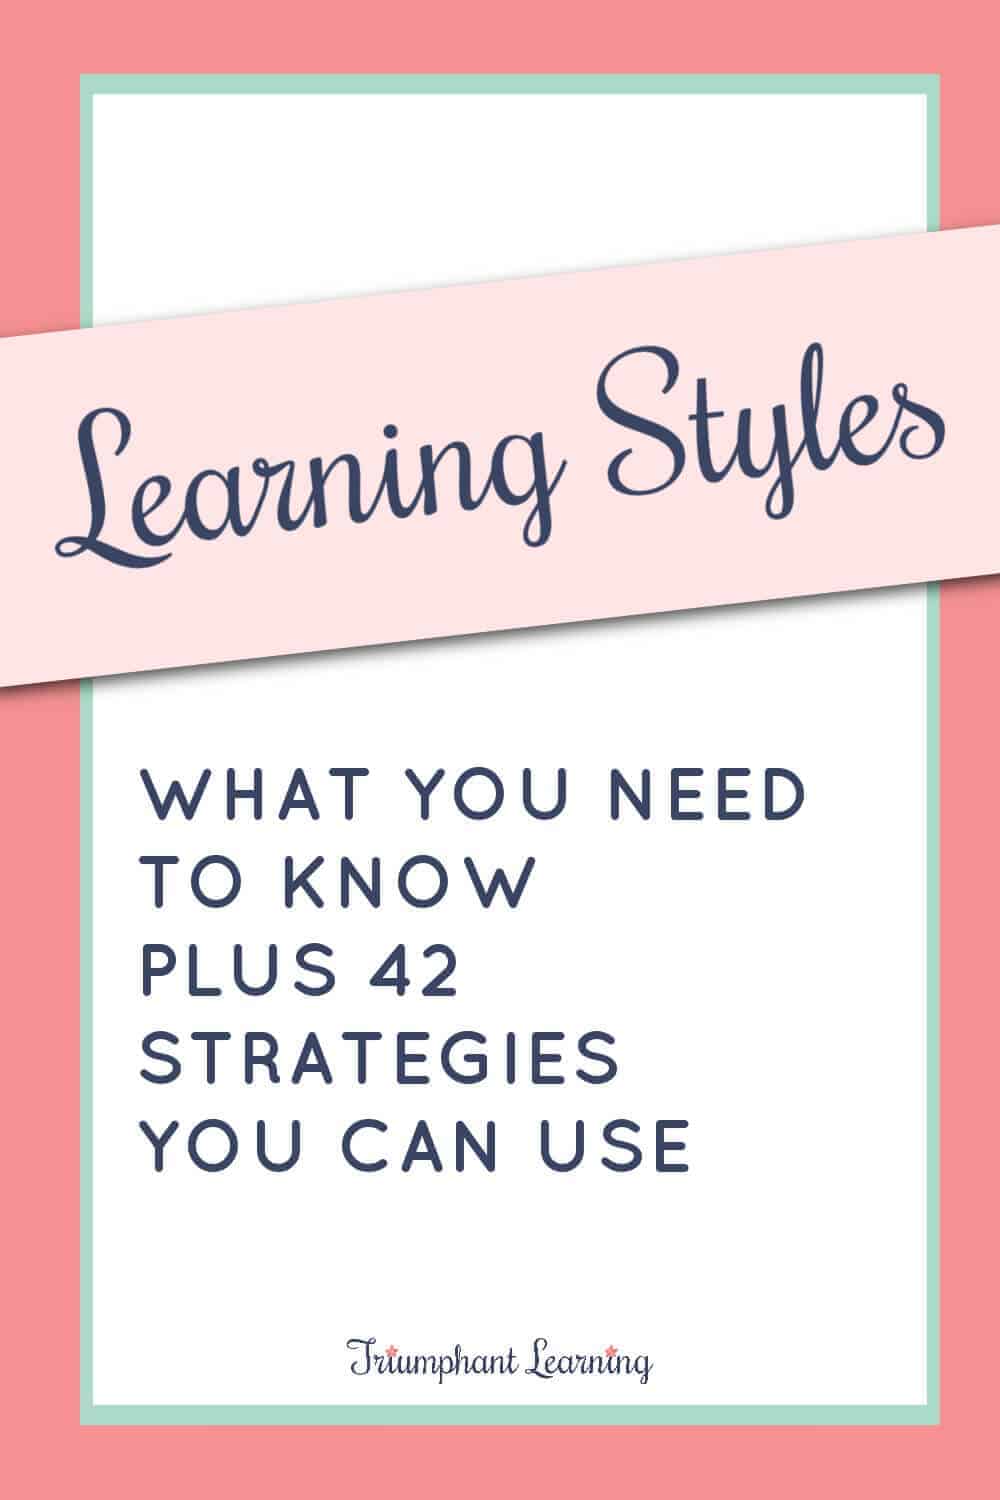 Does your child's learning style matter? Learn what you need to know about learning styles and strategies to use in your homeschool. via @TriLearning